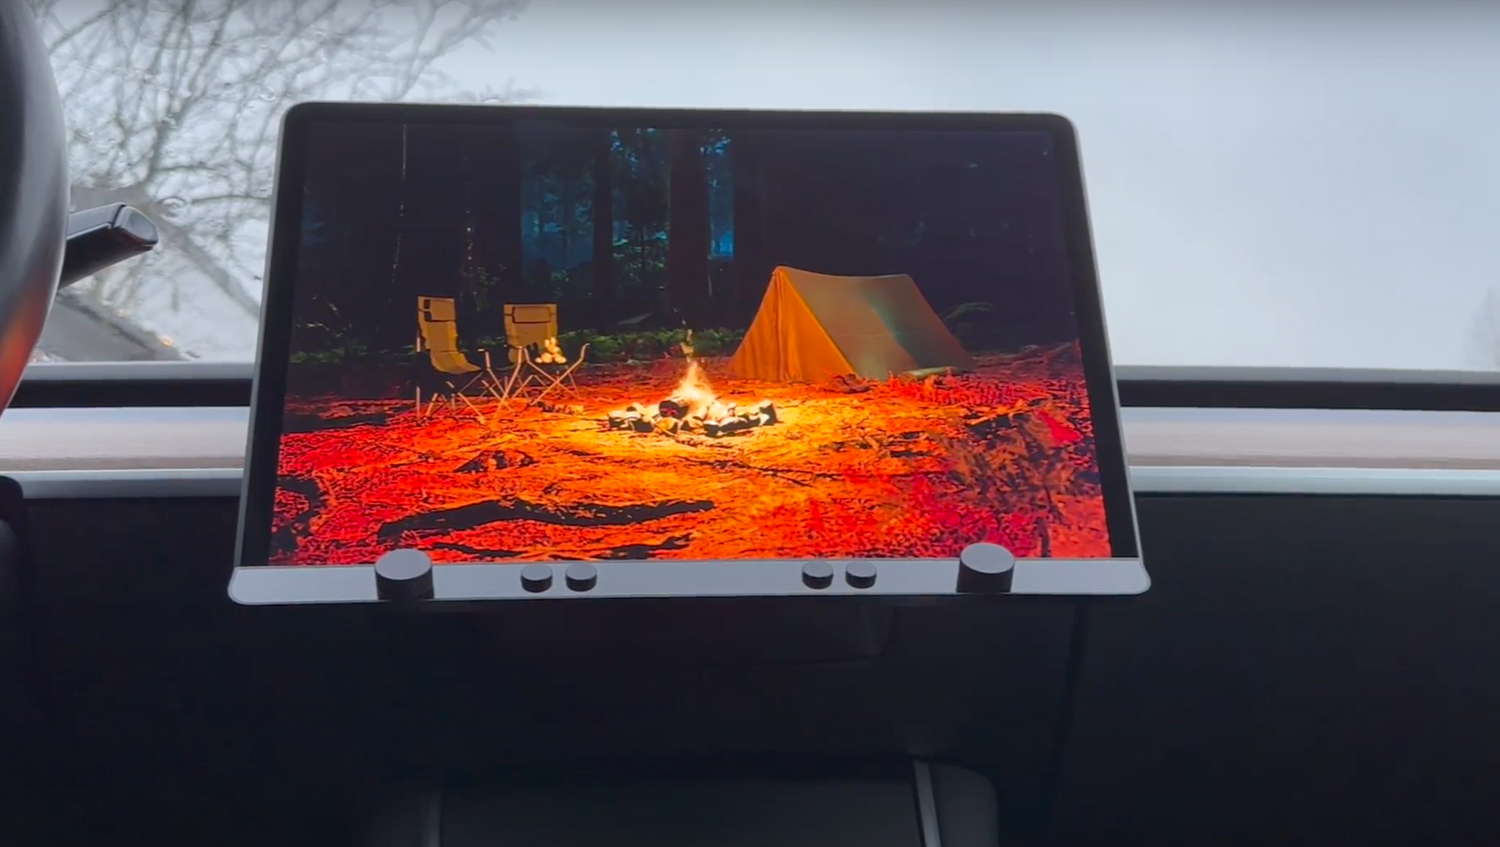 Embracing Autumn with Tesla's Cozy Fireplace Feature